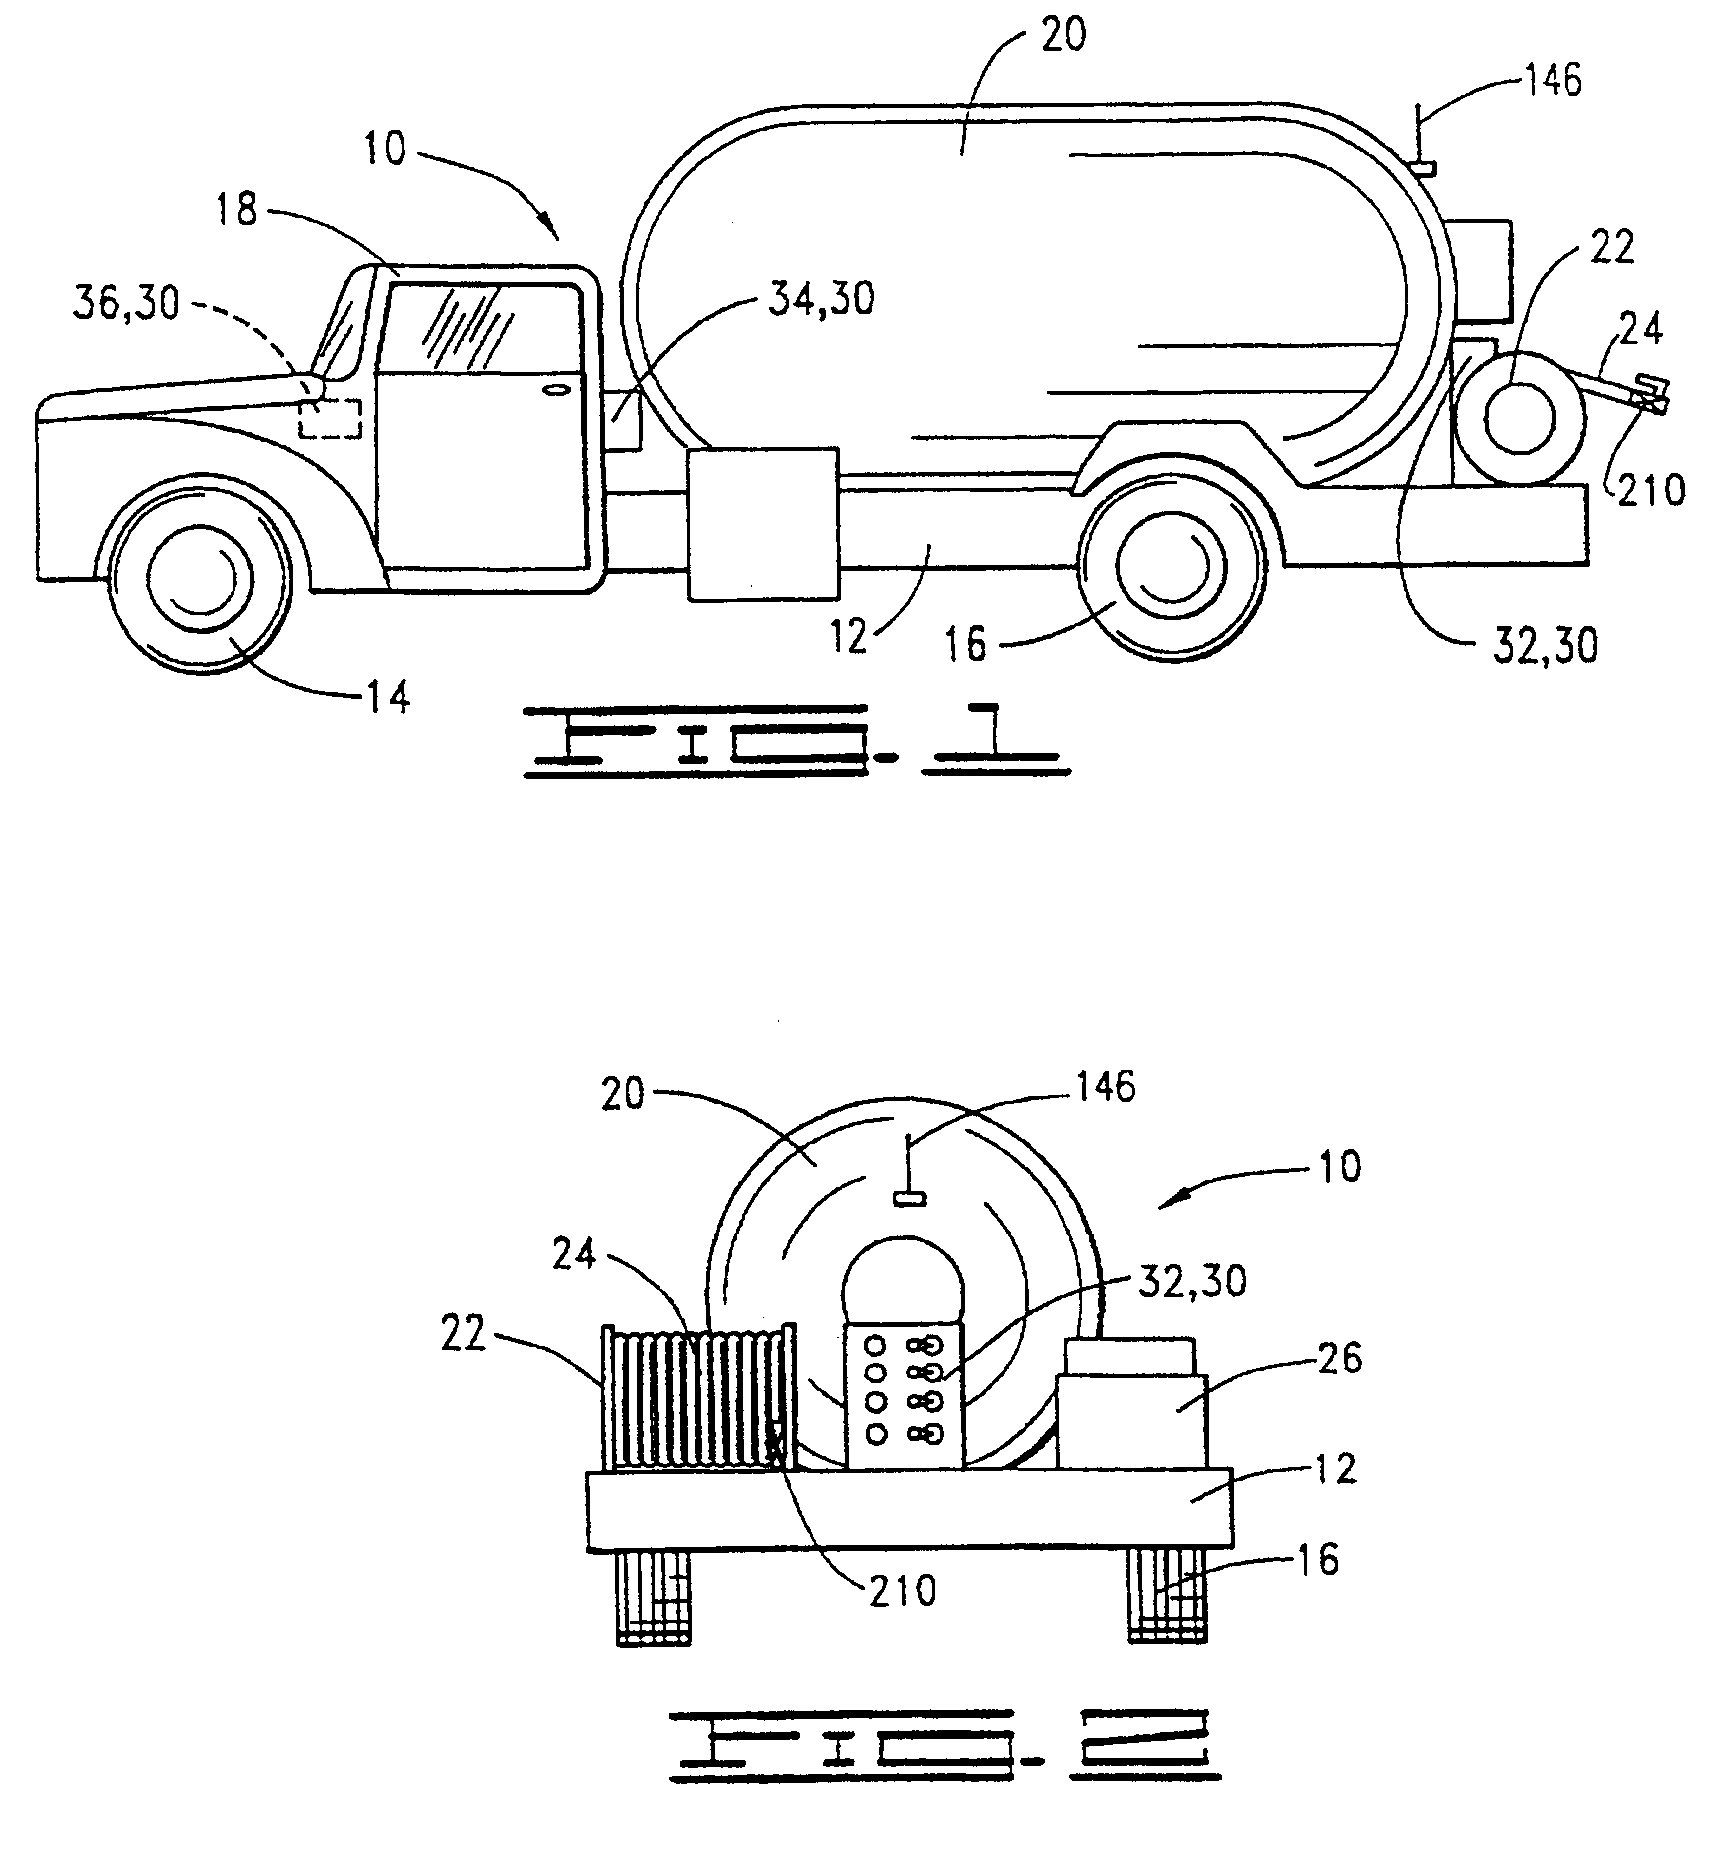 Liquid delivery vehicle with remote control system